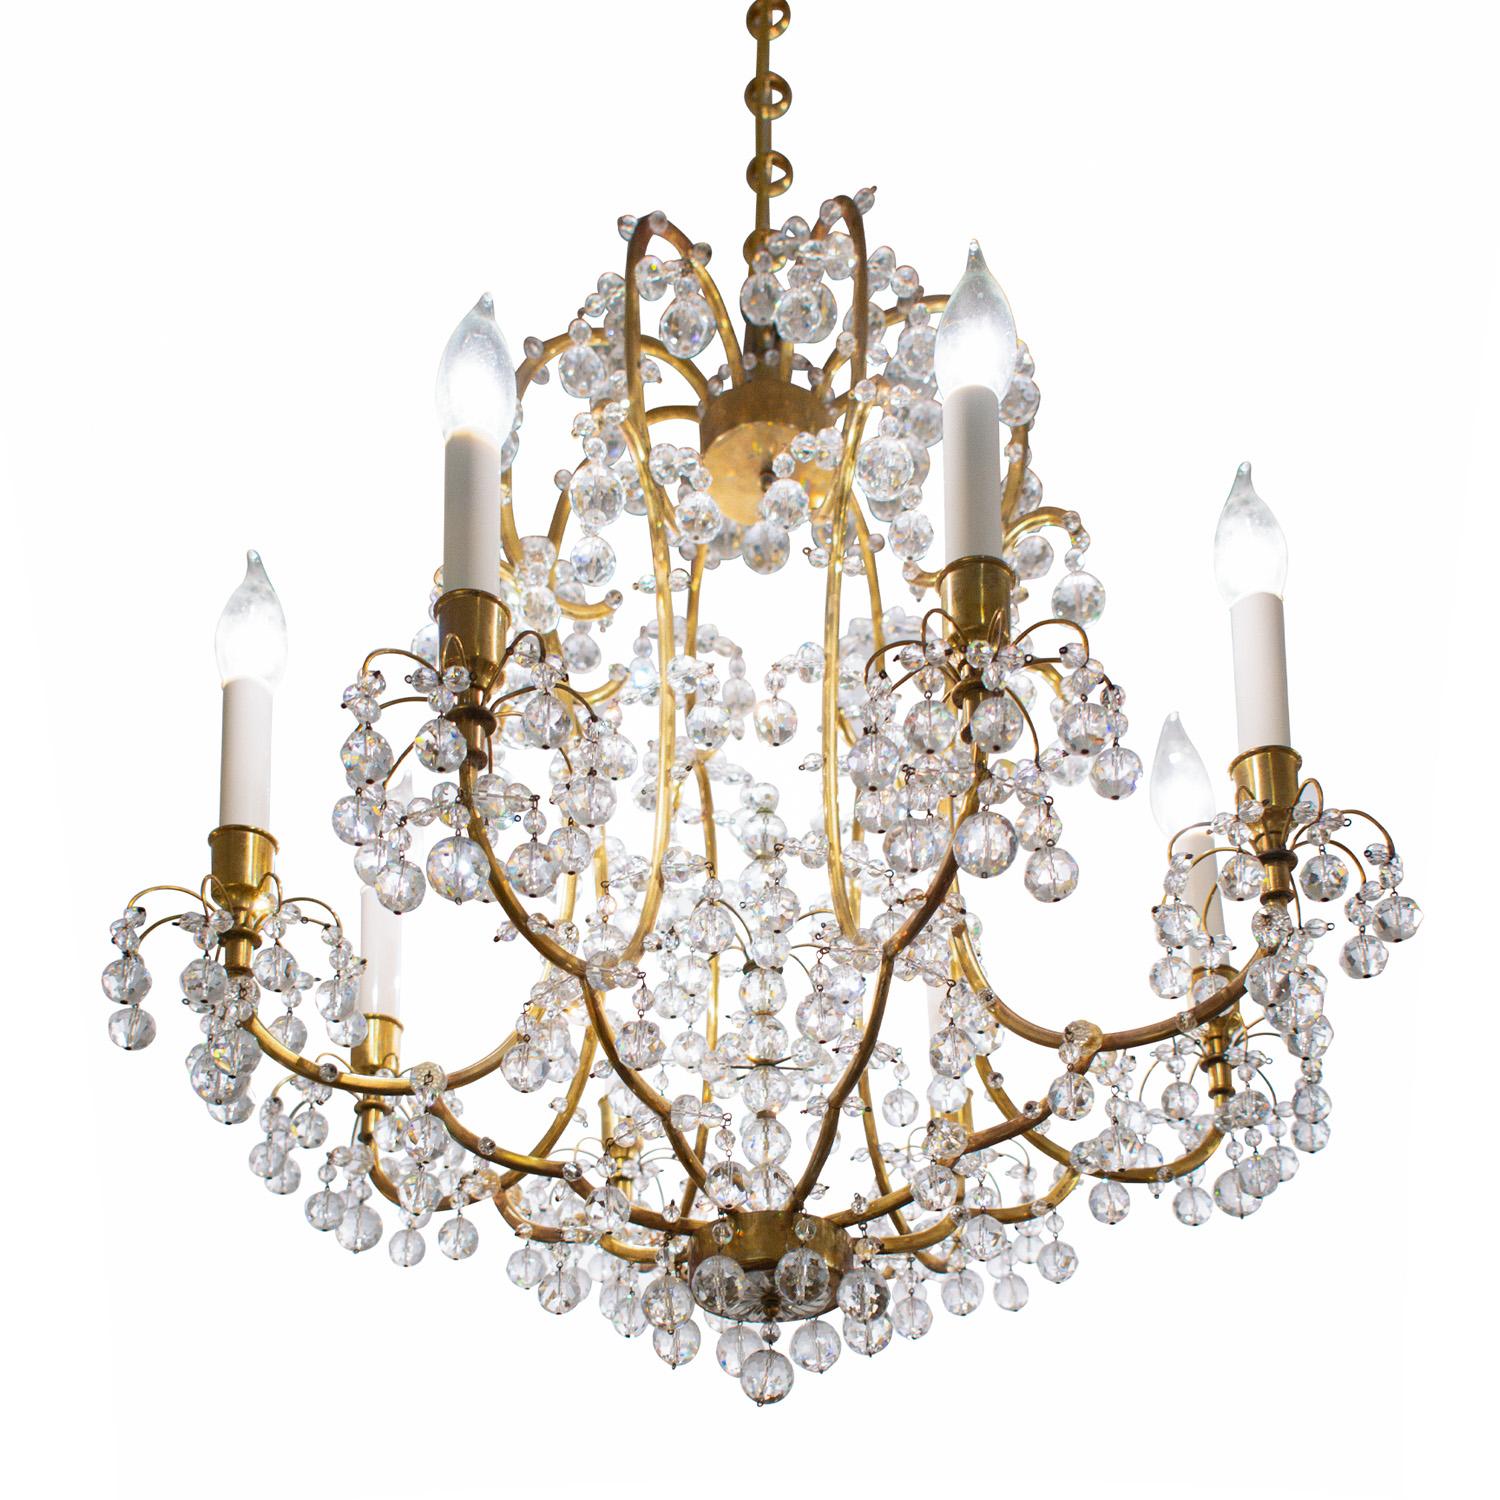 Mid-Century Modern Lobmeyr Rare and Stunning Chandelier with Crystals 1959 For Sale